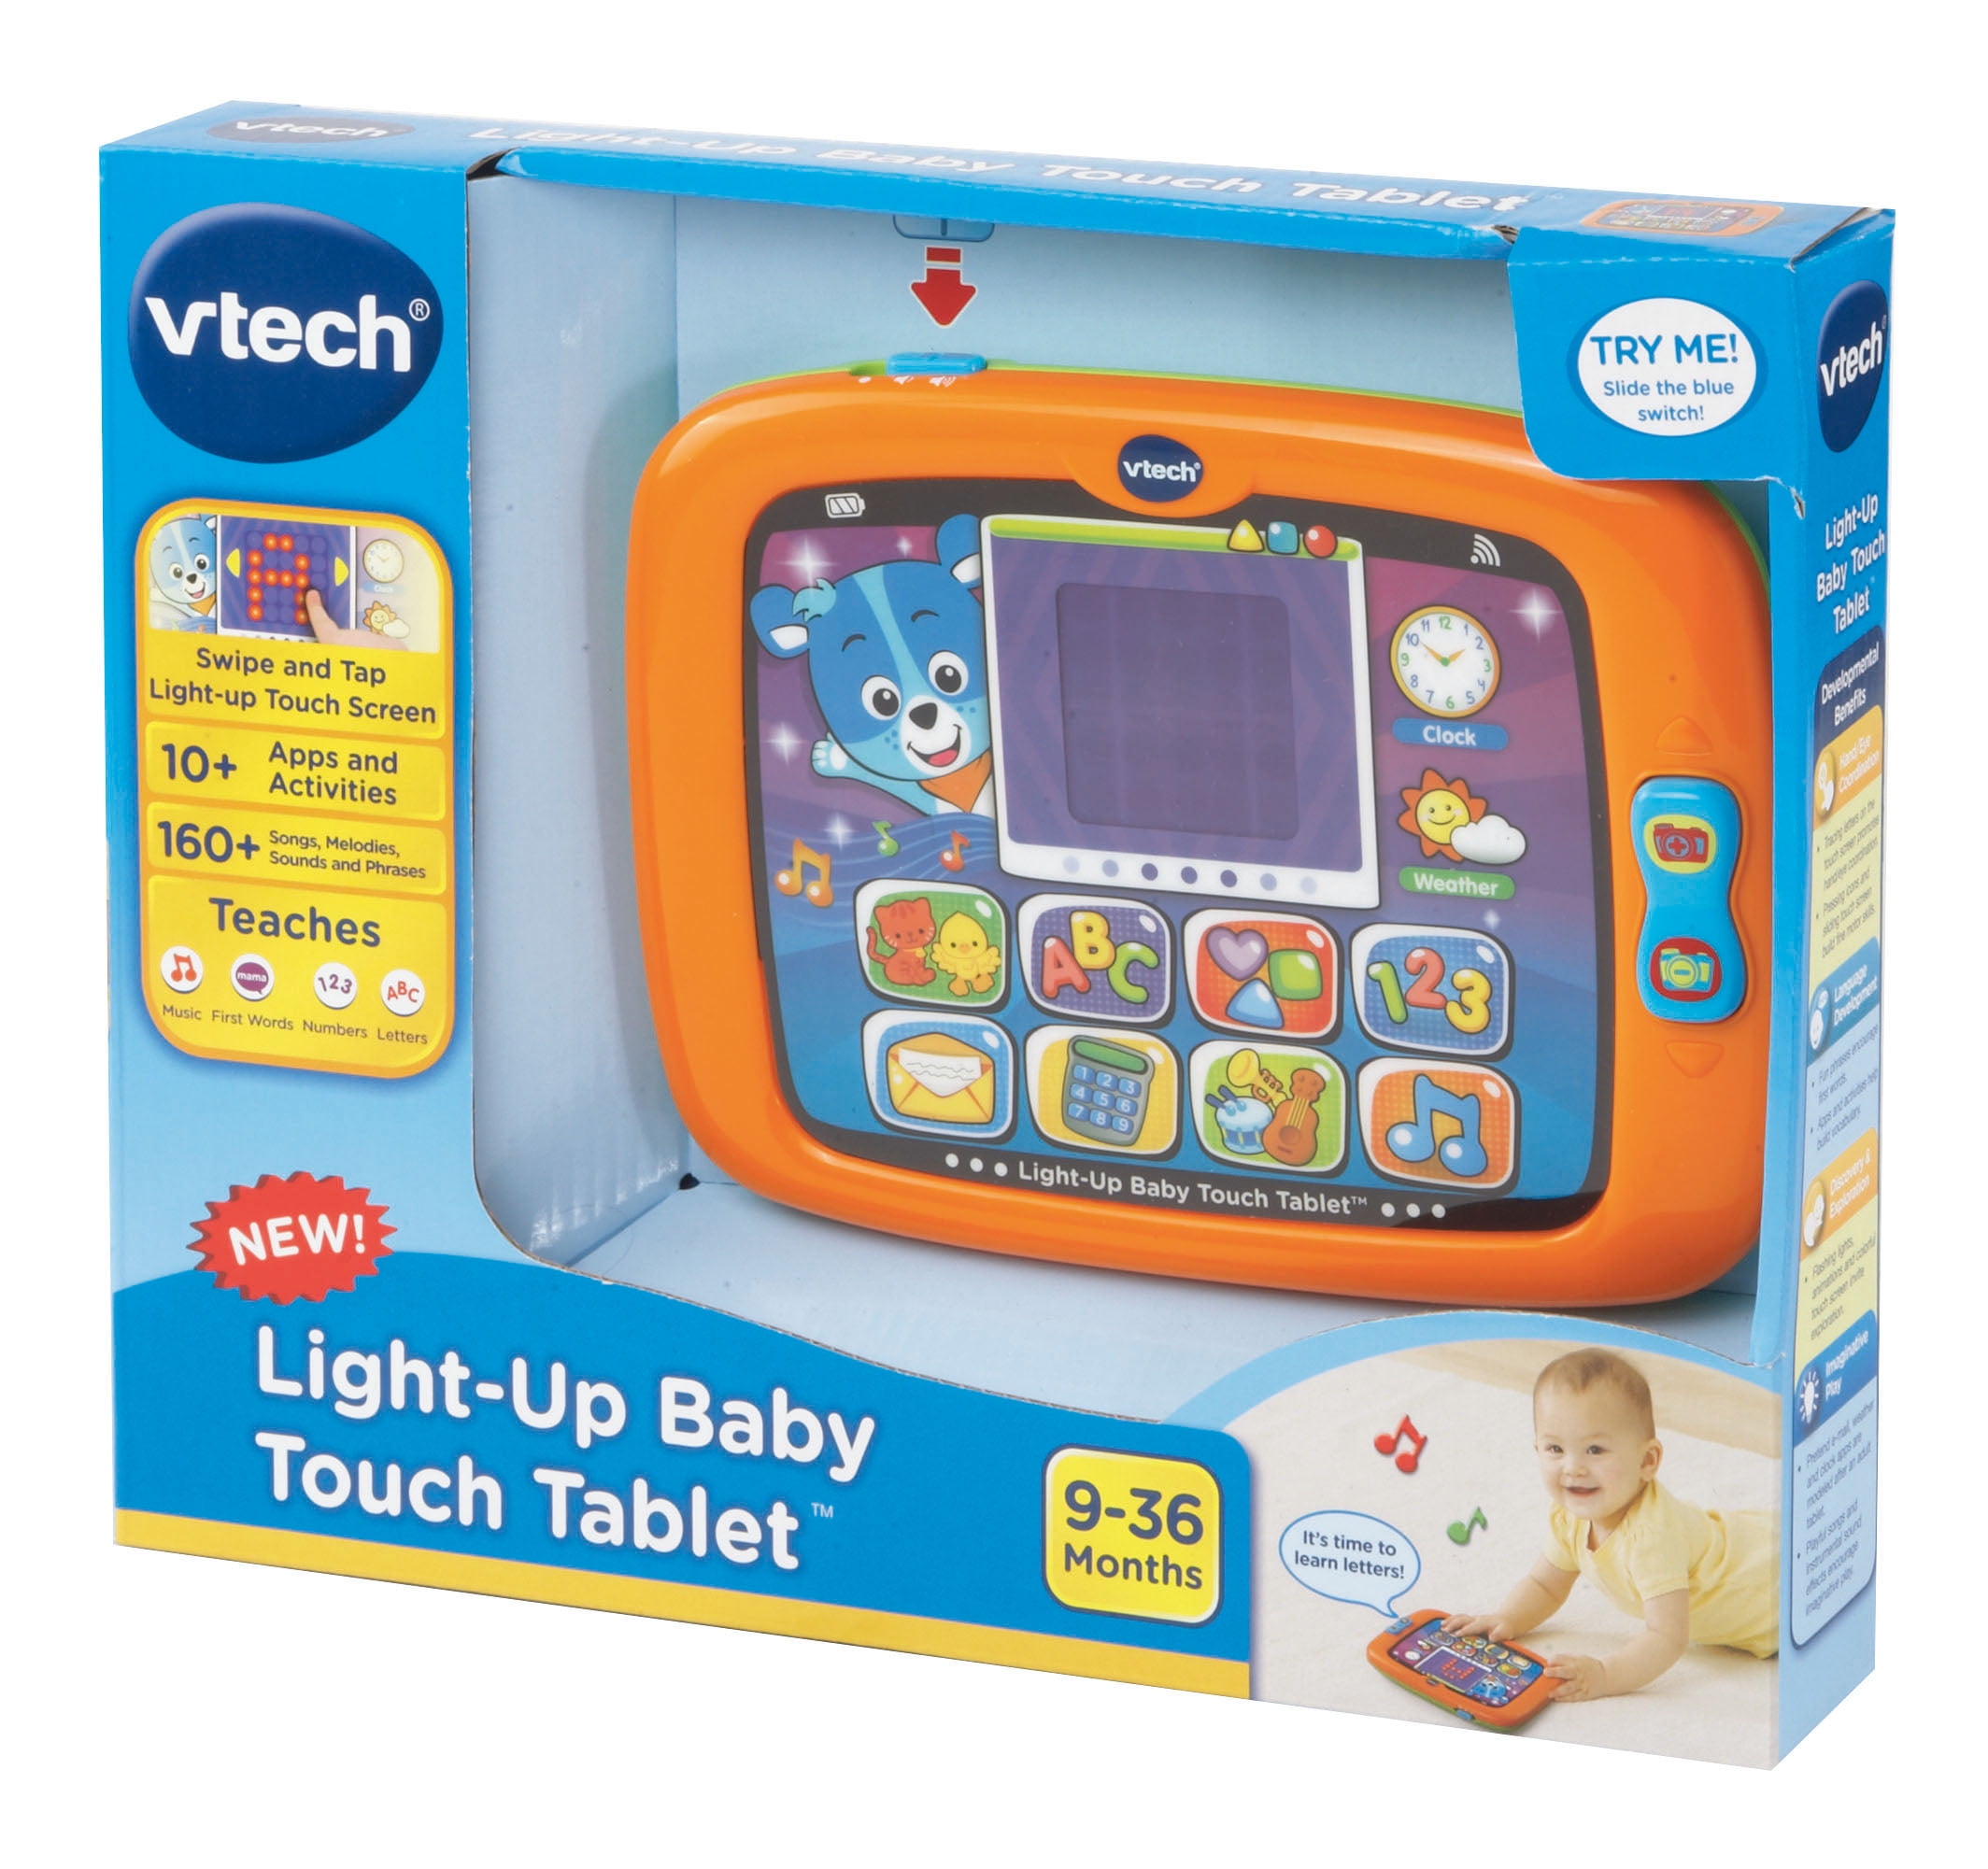 VTech Light-Up Baby Touch Tablet Pink 